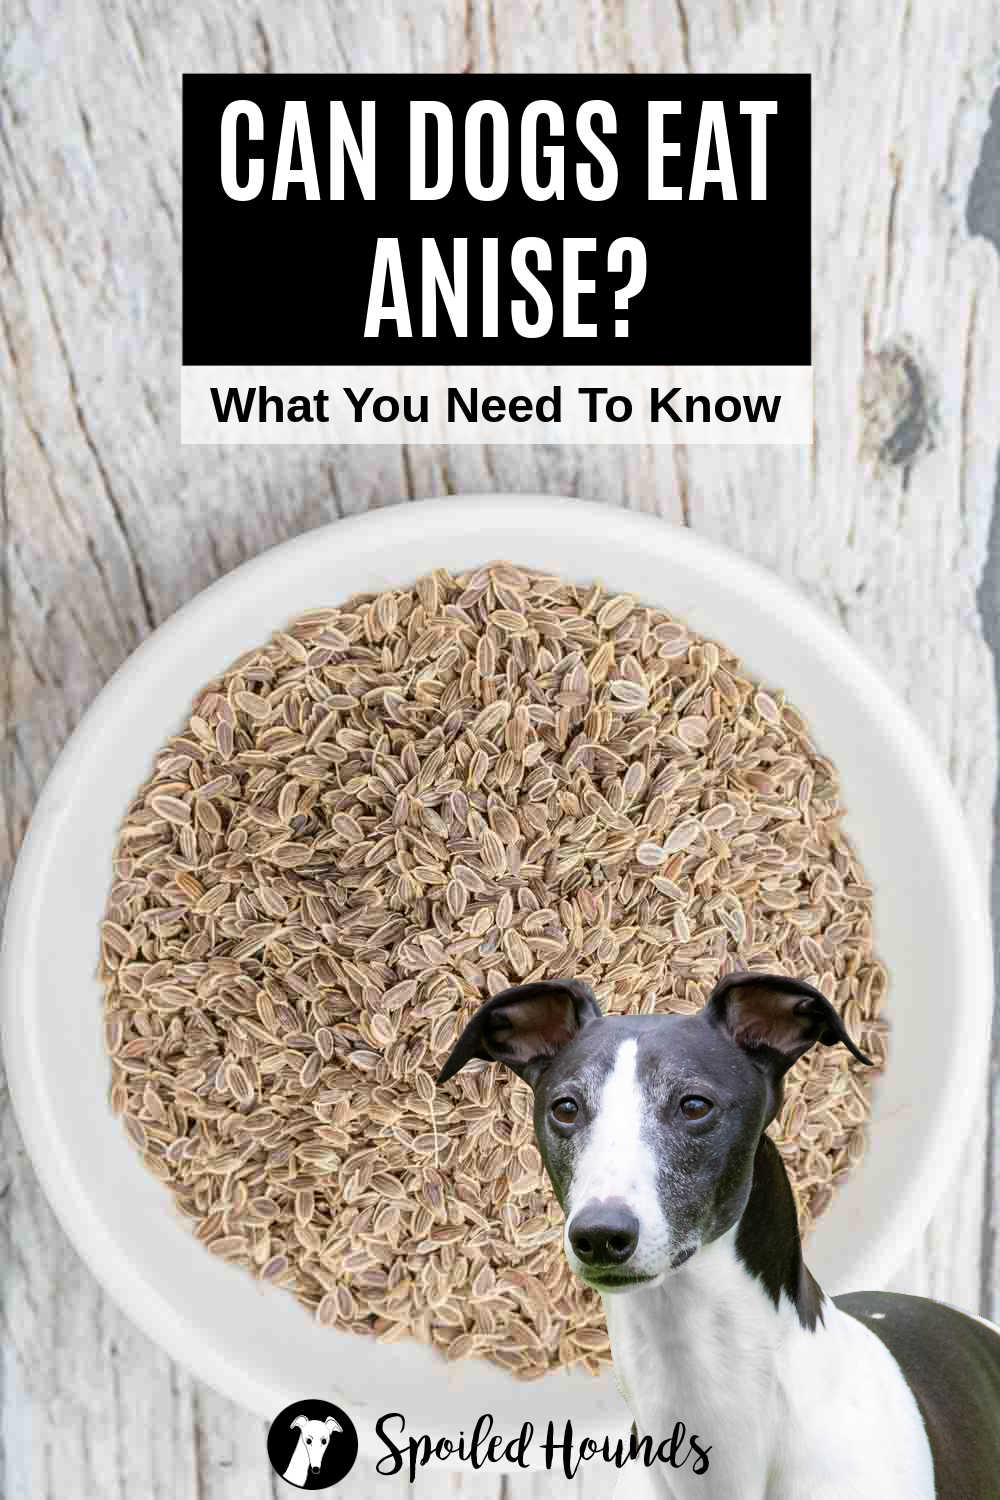 Whippet dog in front of a bowl of anise seeds.